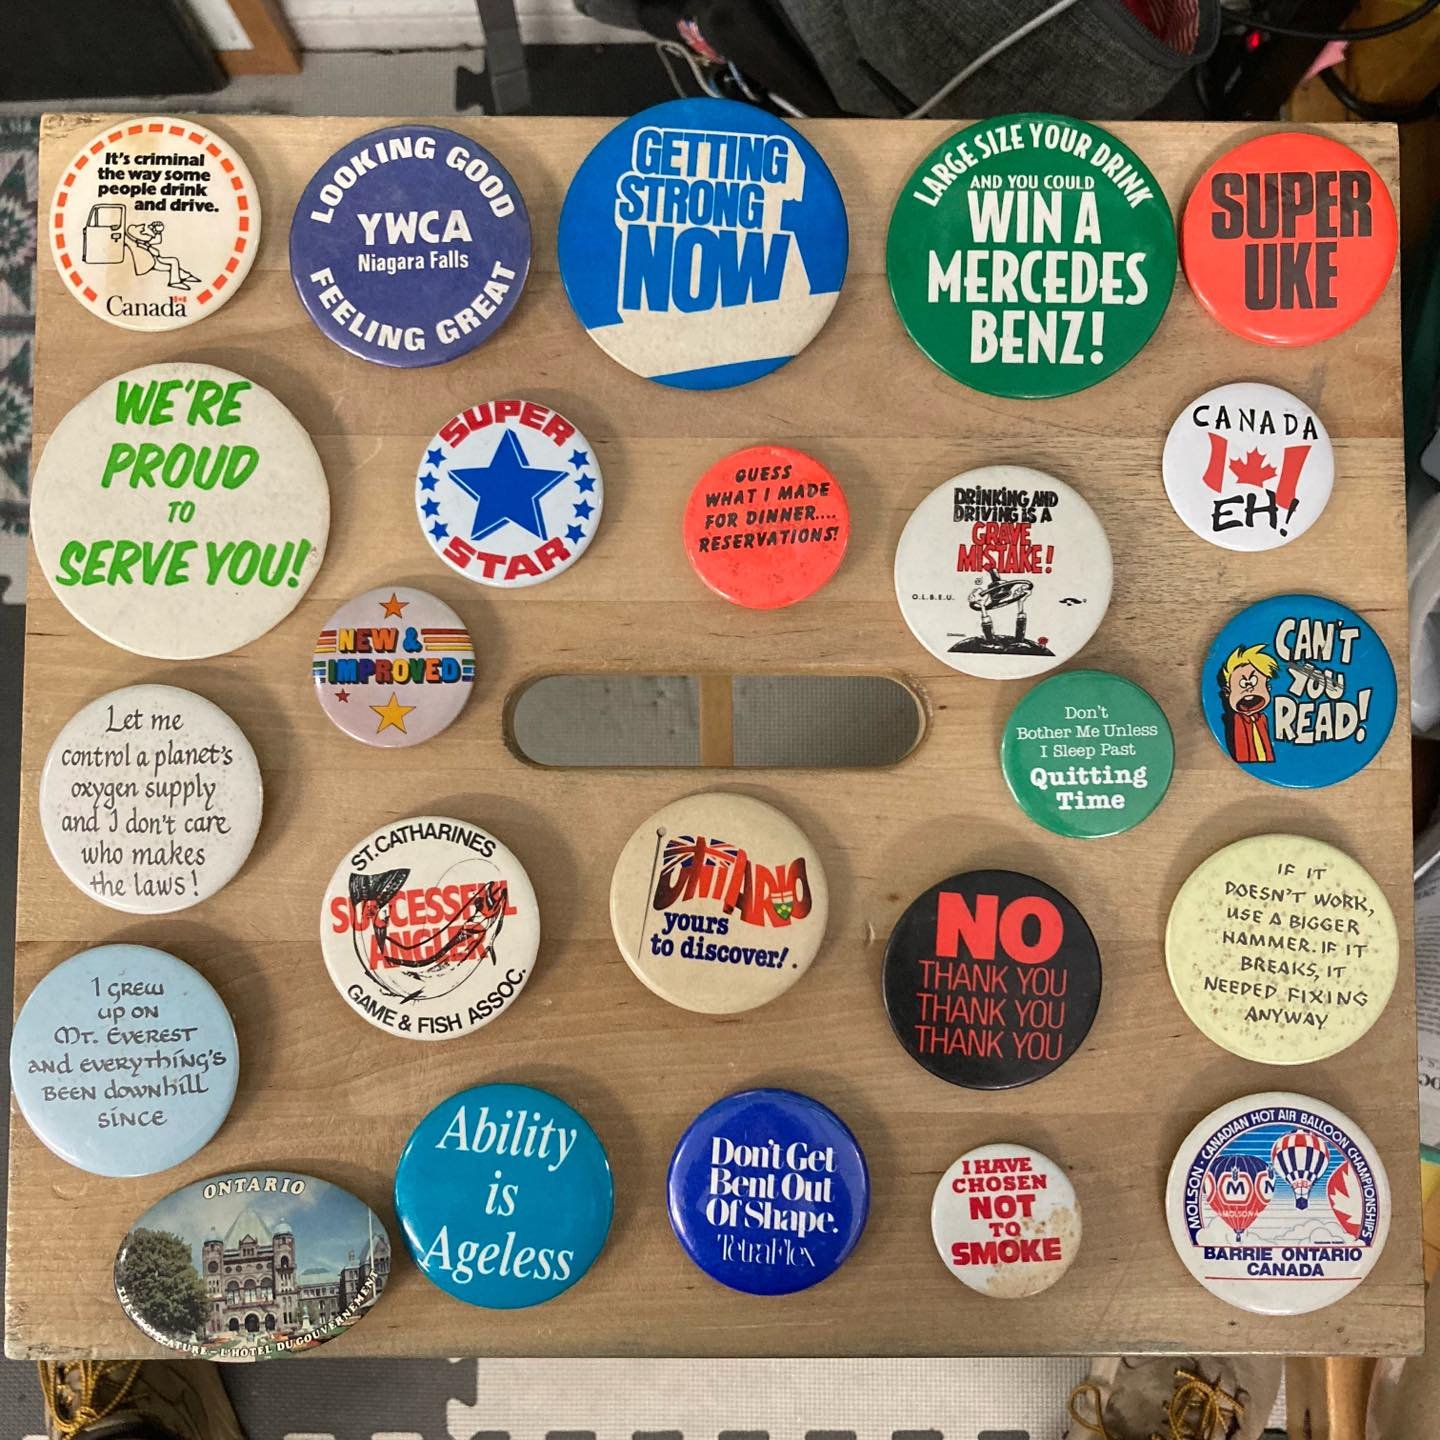 Just a few of the buttons we added to the shop recently&hellip;

&hellip;a buck or two

🌲

#secondhand #thrift #thriftshopfinds #thriftshop #thriftstore #shoplocal #niagarafalls #ShopSmall